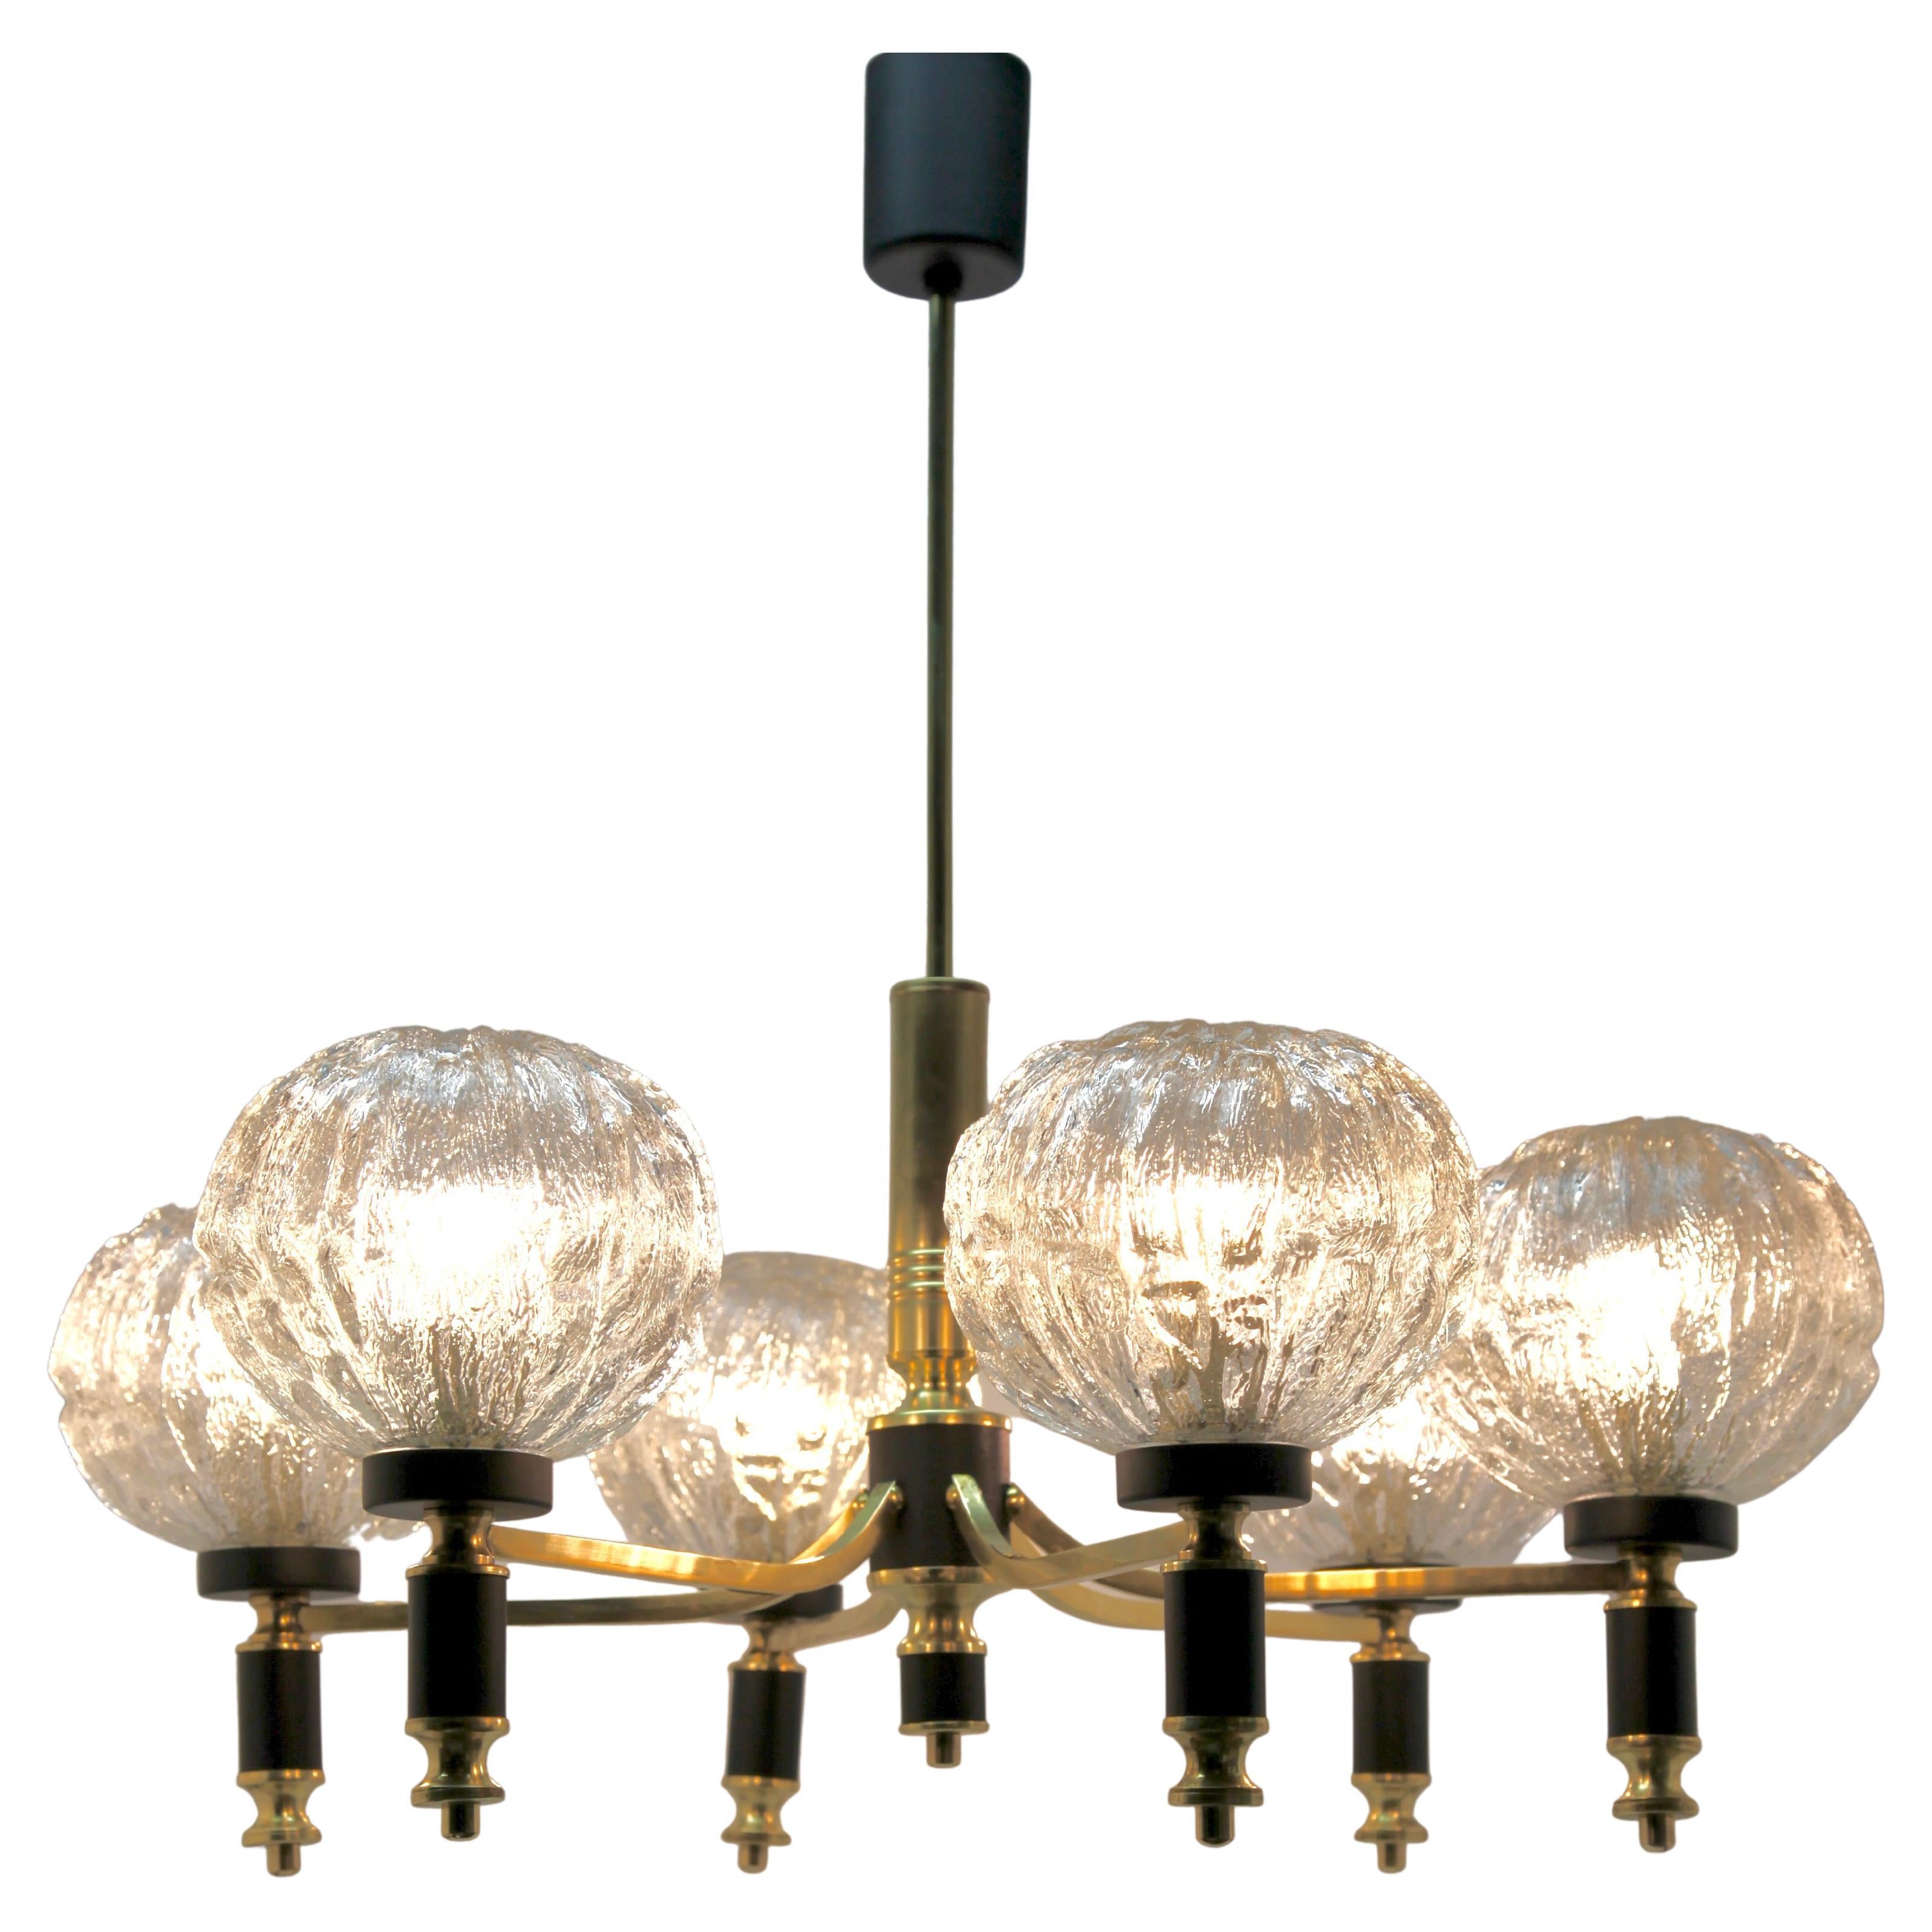 6 arms chandelier style of Stilnovo. 
Photography fails to capture the simple elegant illumination provided by this lamp.

Recently cleaned and polished so that it is in excellent condition and in full working order 
Fittings E14

And safe for